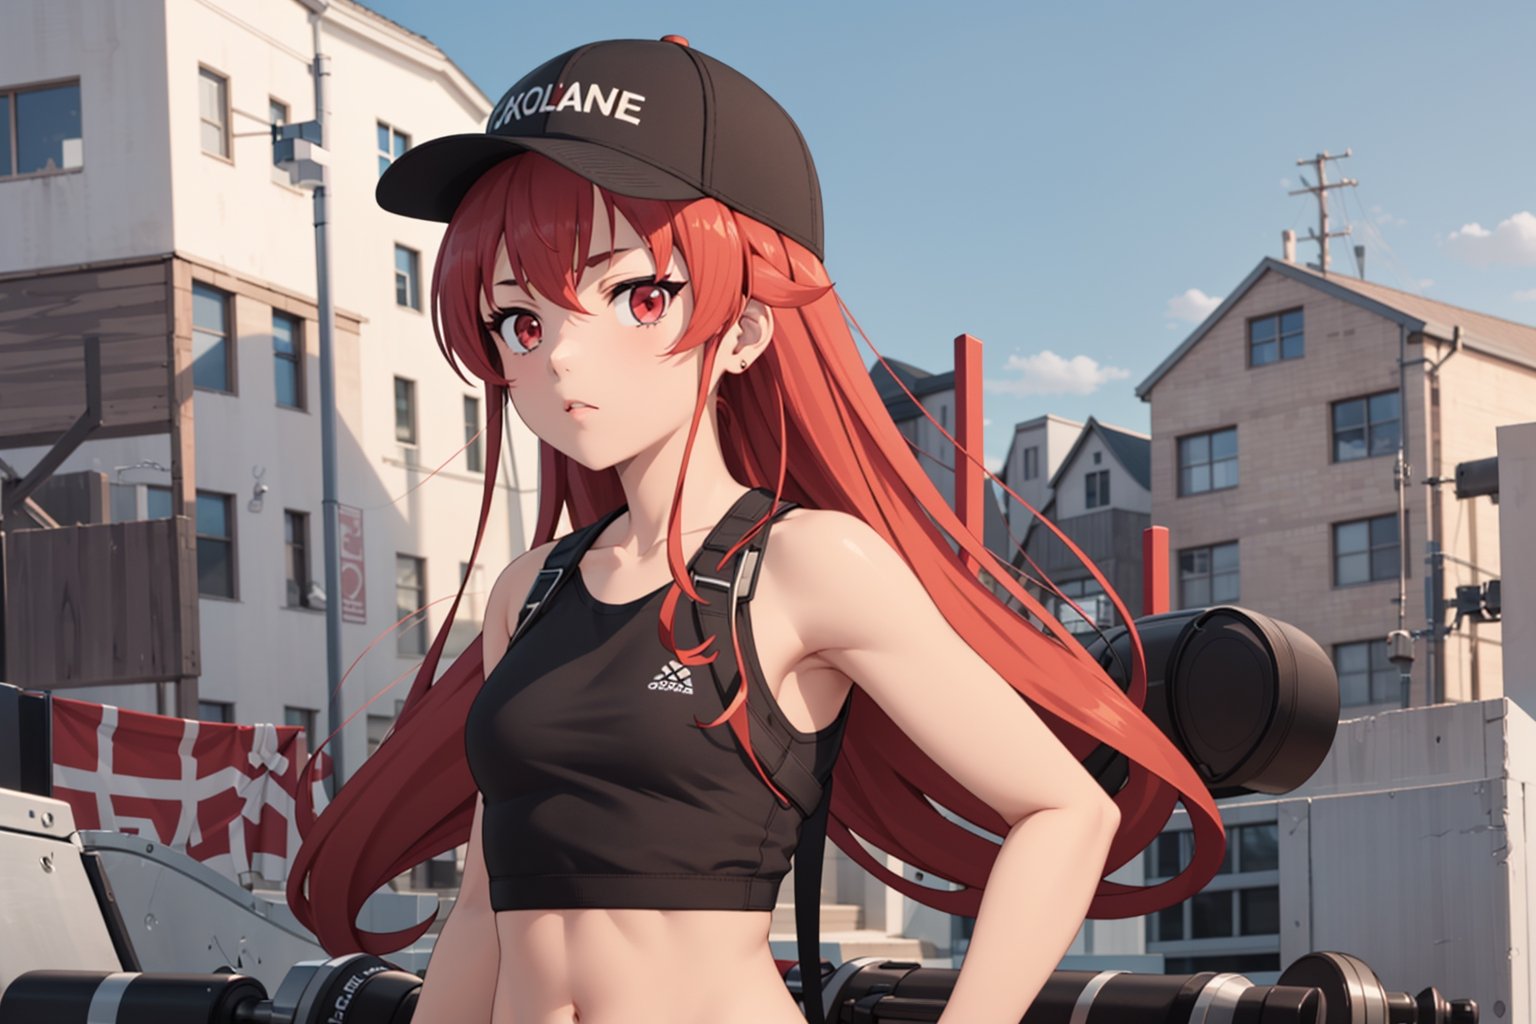 1girl, solo, beautiful girl with beautiful red eyes and hair, girl with casual style, crop top, feminine, medium breast, flat expression

ultra detail, ultra realistic,eris greyrat, 3D anime,

from side, facing the viewer, looking at viewer, stylish girl, chest visible,

sports sling bag, girls sports hat,

on the gym